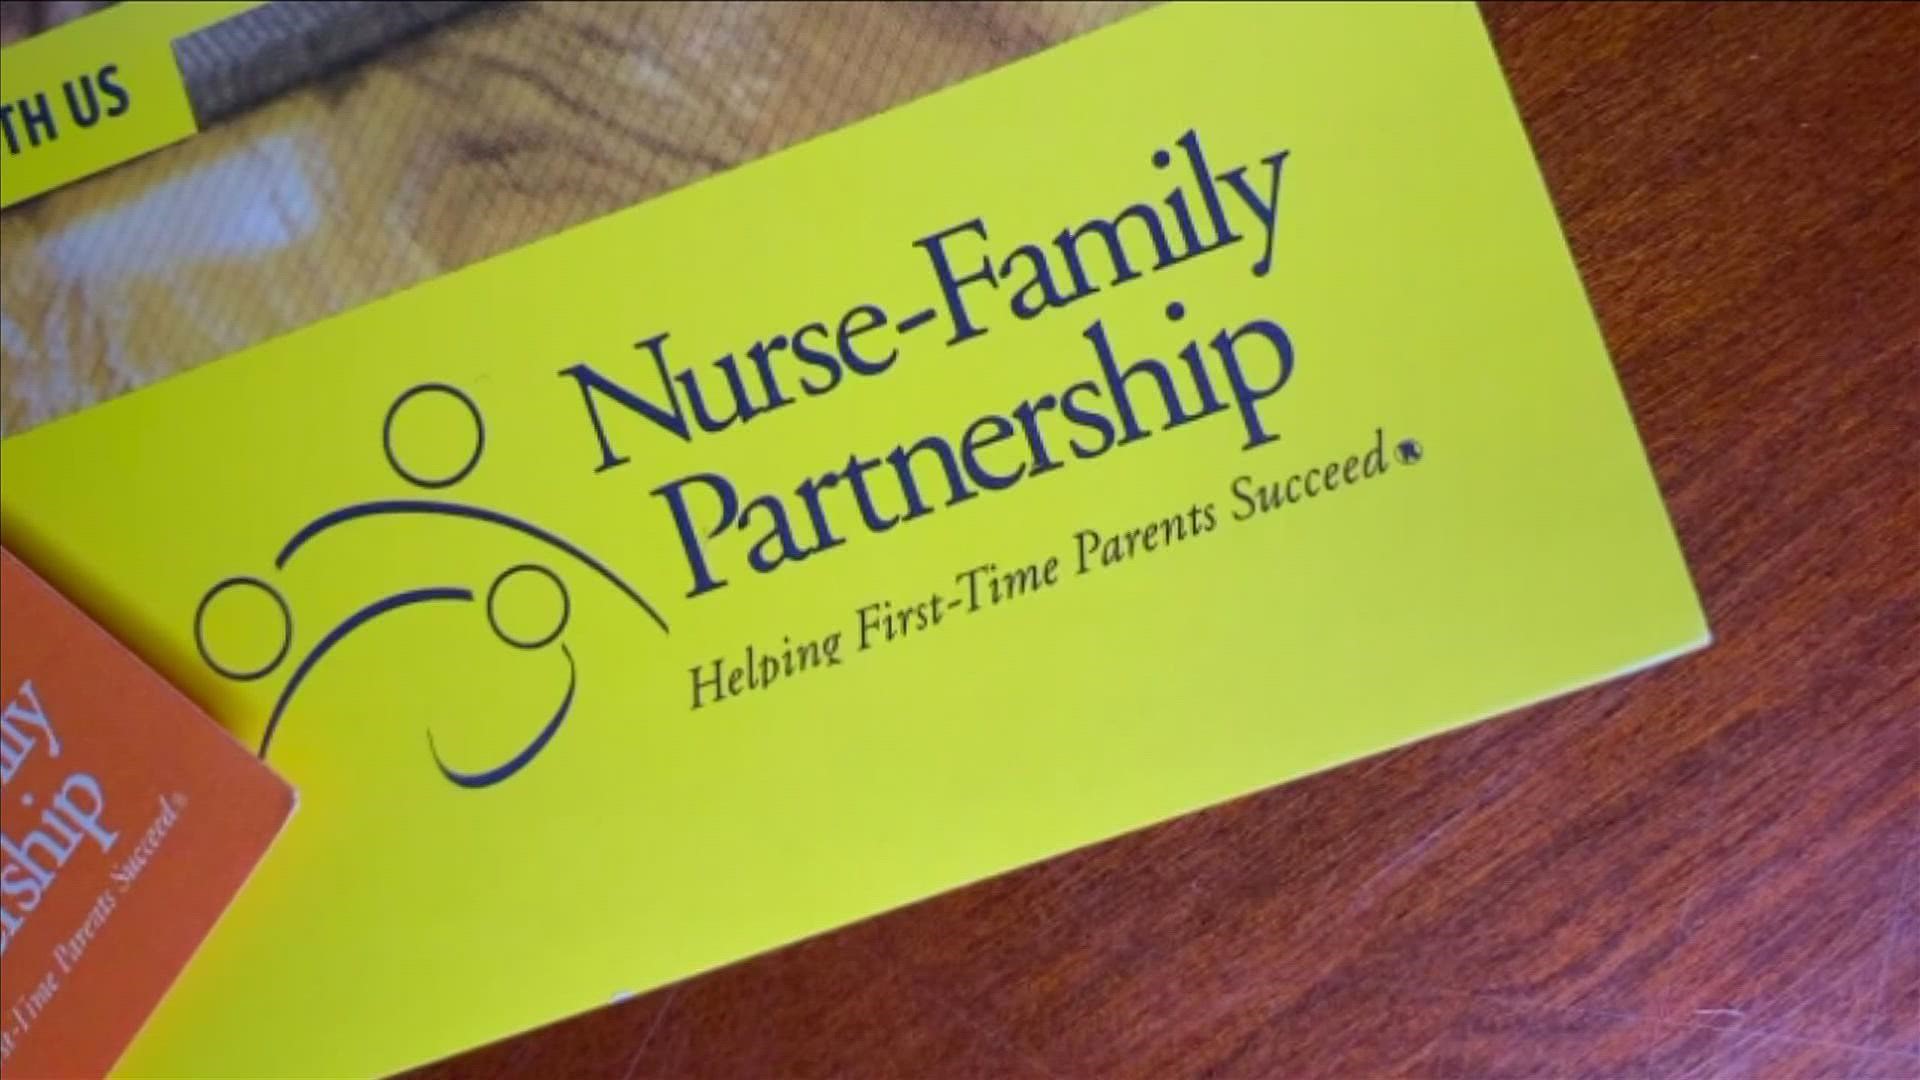 Nurse-Family Partnership serves vulnerable young families in counties across Tennessee.